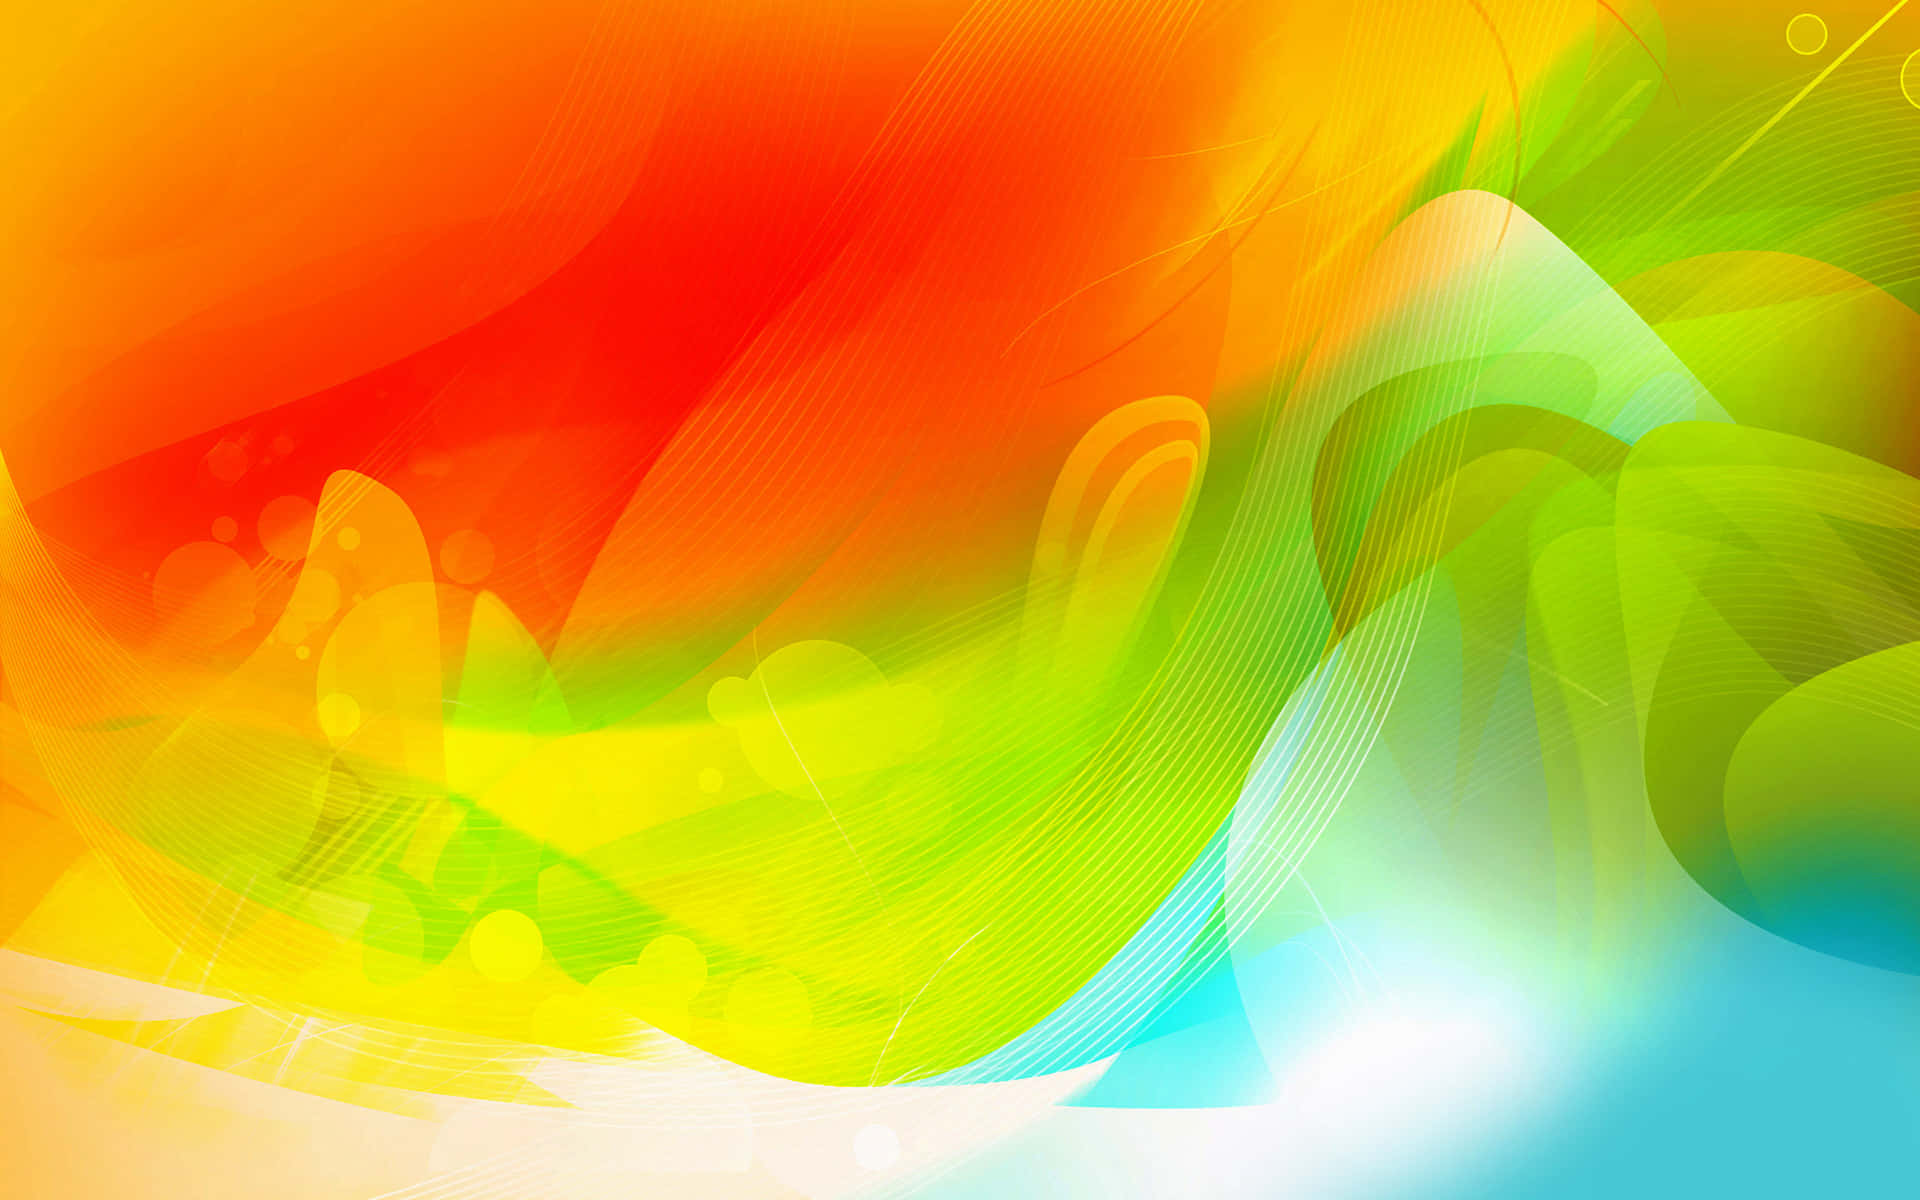 Vibrant colors merge together in this beautiful abstract art.